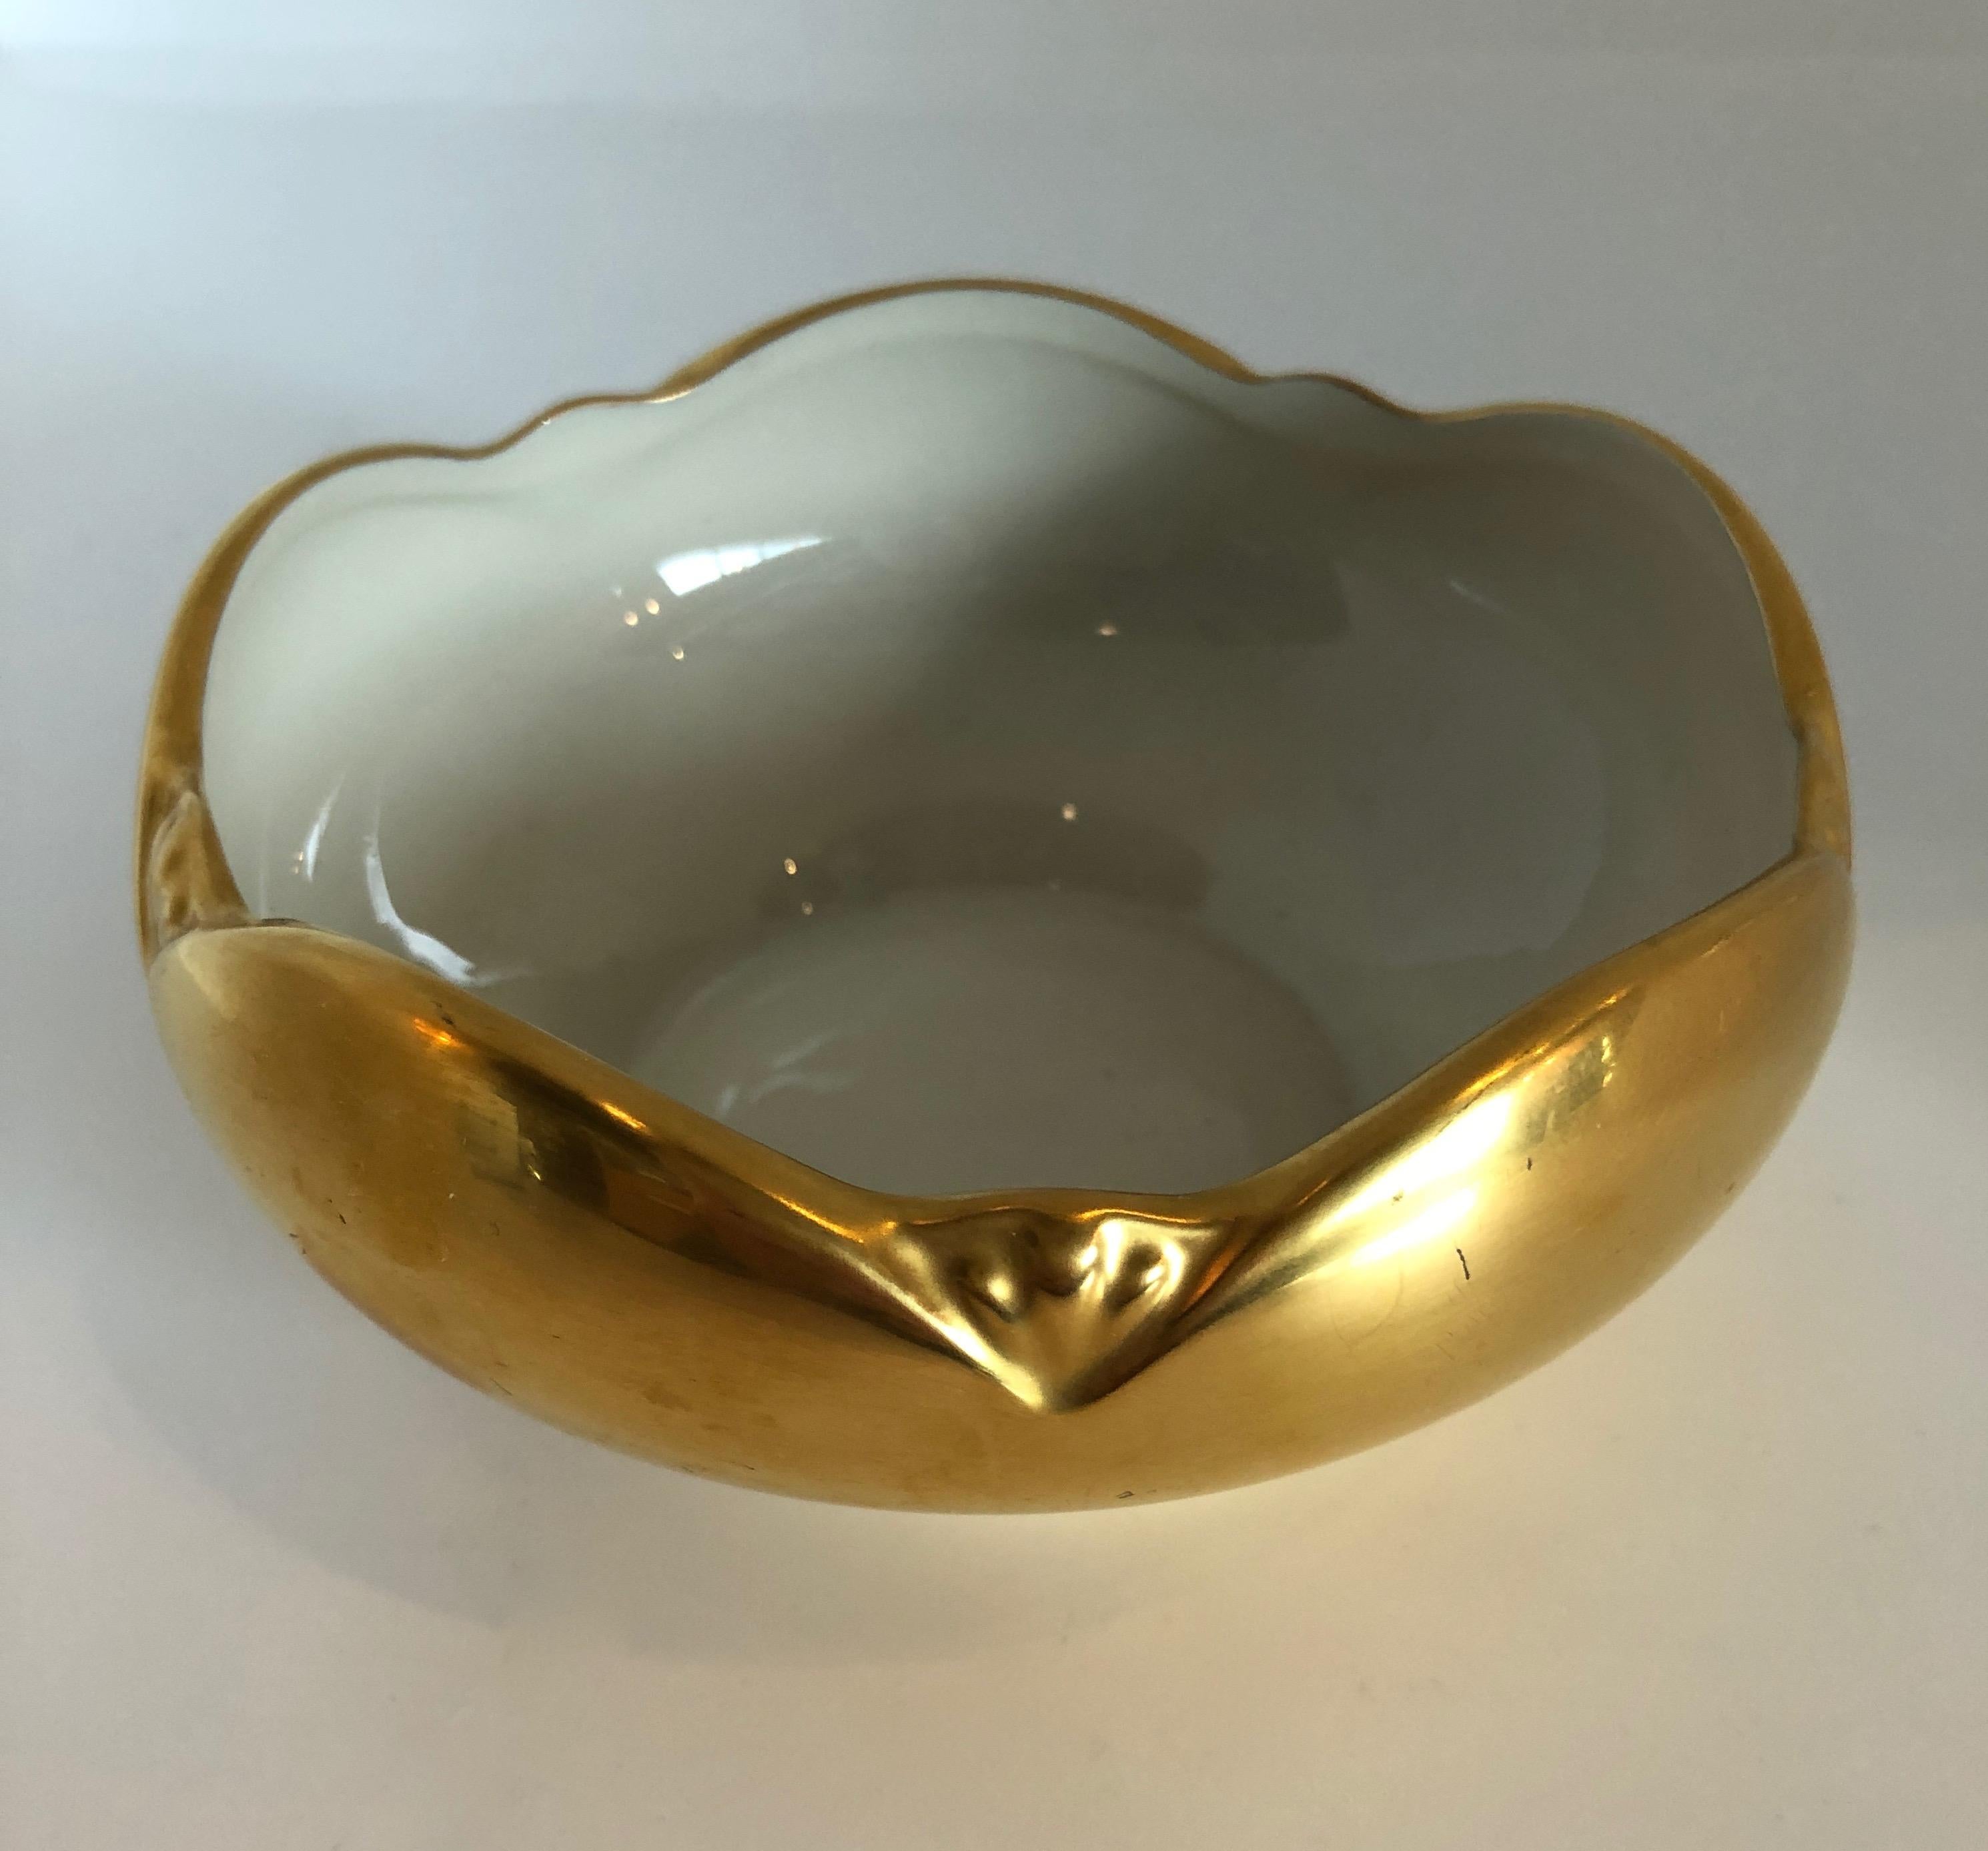 Set of 6 Picard Hand Decorated Ensemble Gold and White Interior Porcelain Bowls For Sale 4